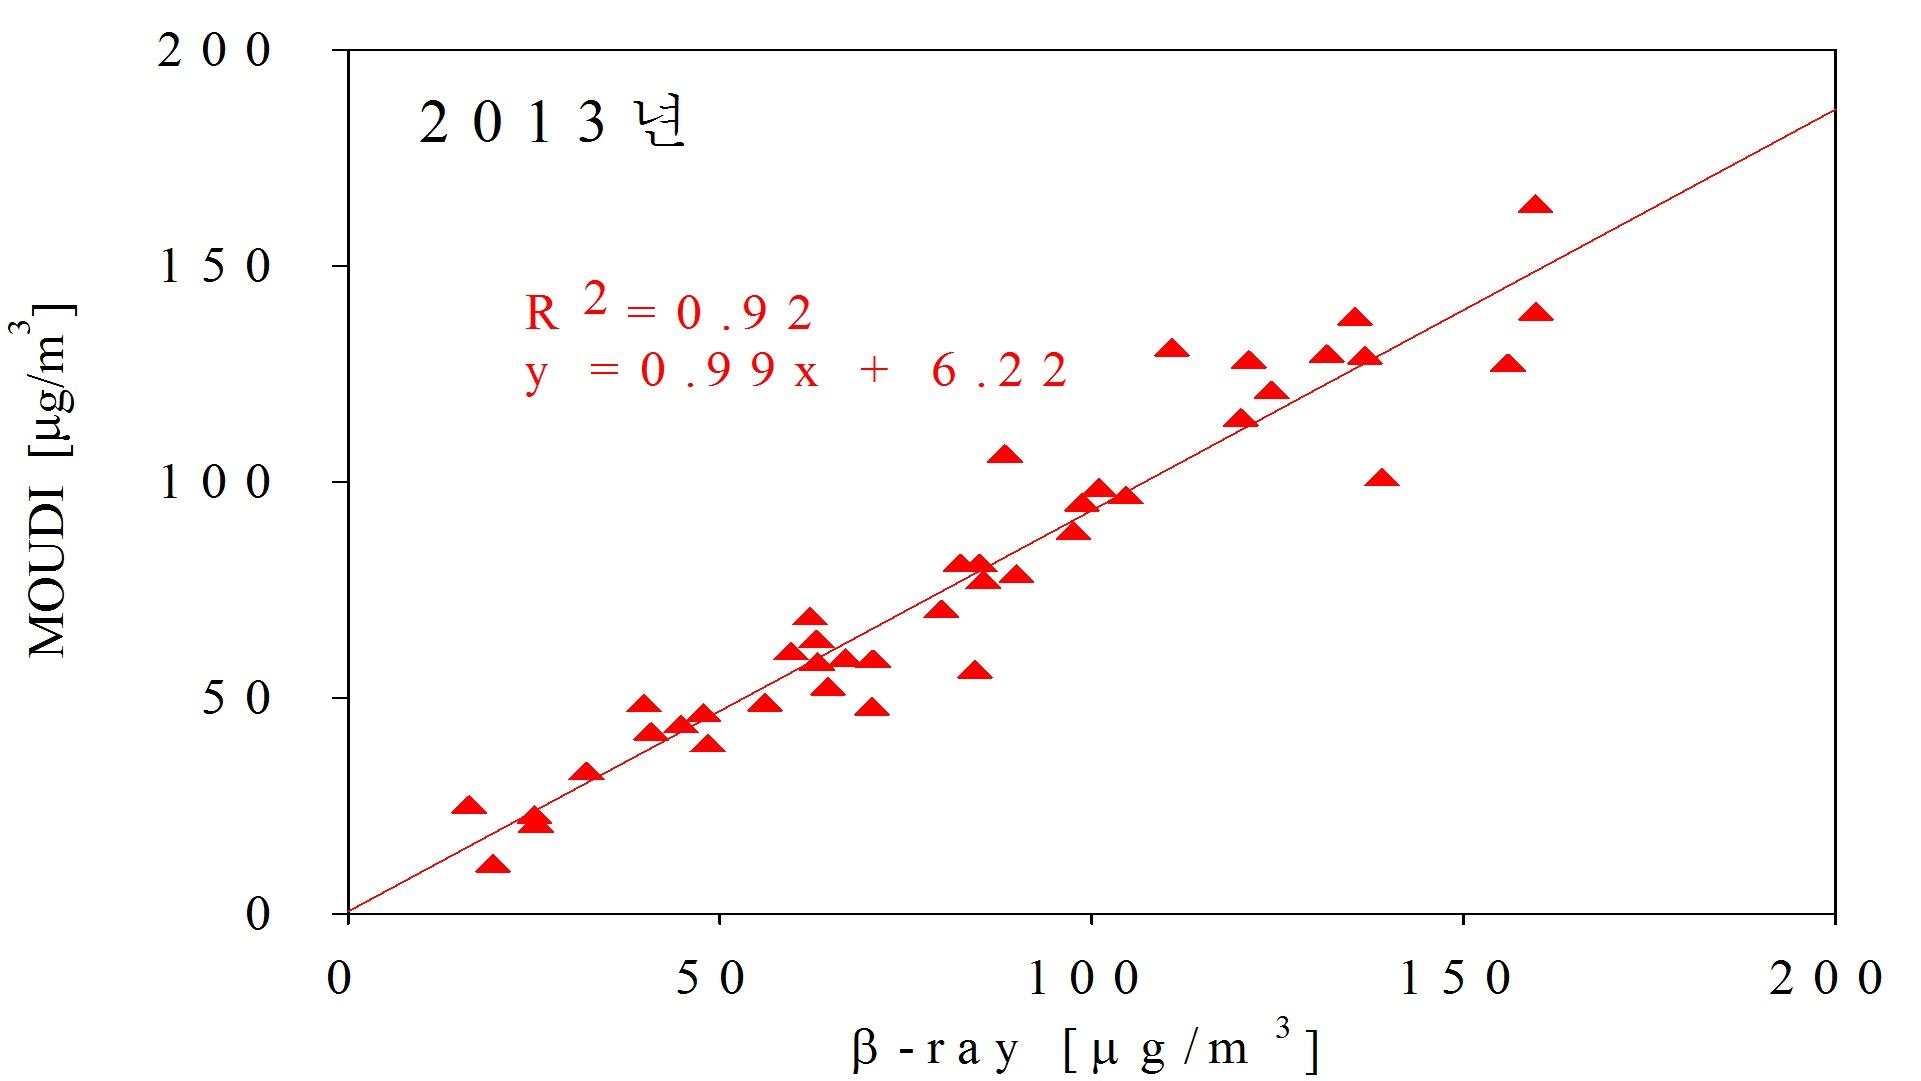 Fig. 2.2.14. Comparisom of PM10 mass concentration observed by β-ray and MOUDI in 2013